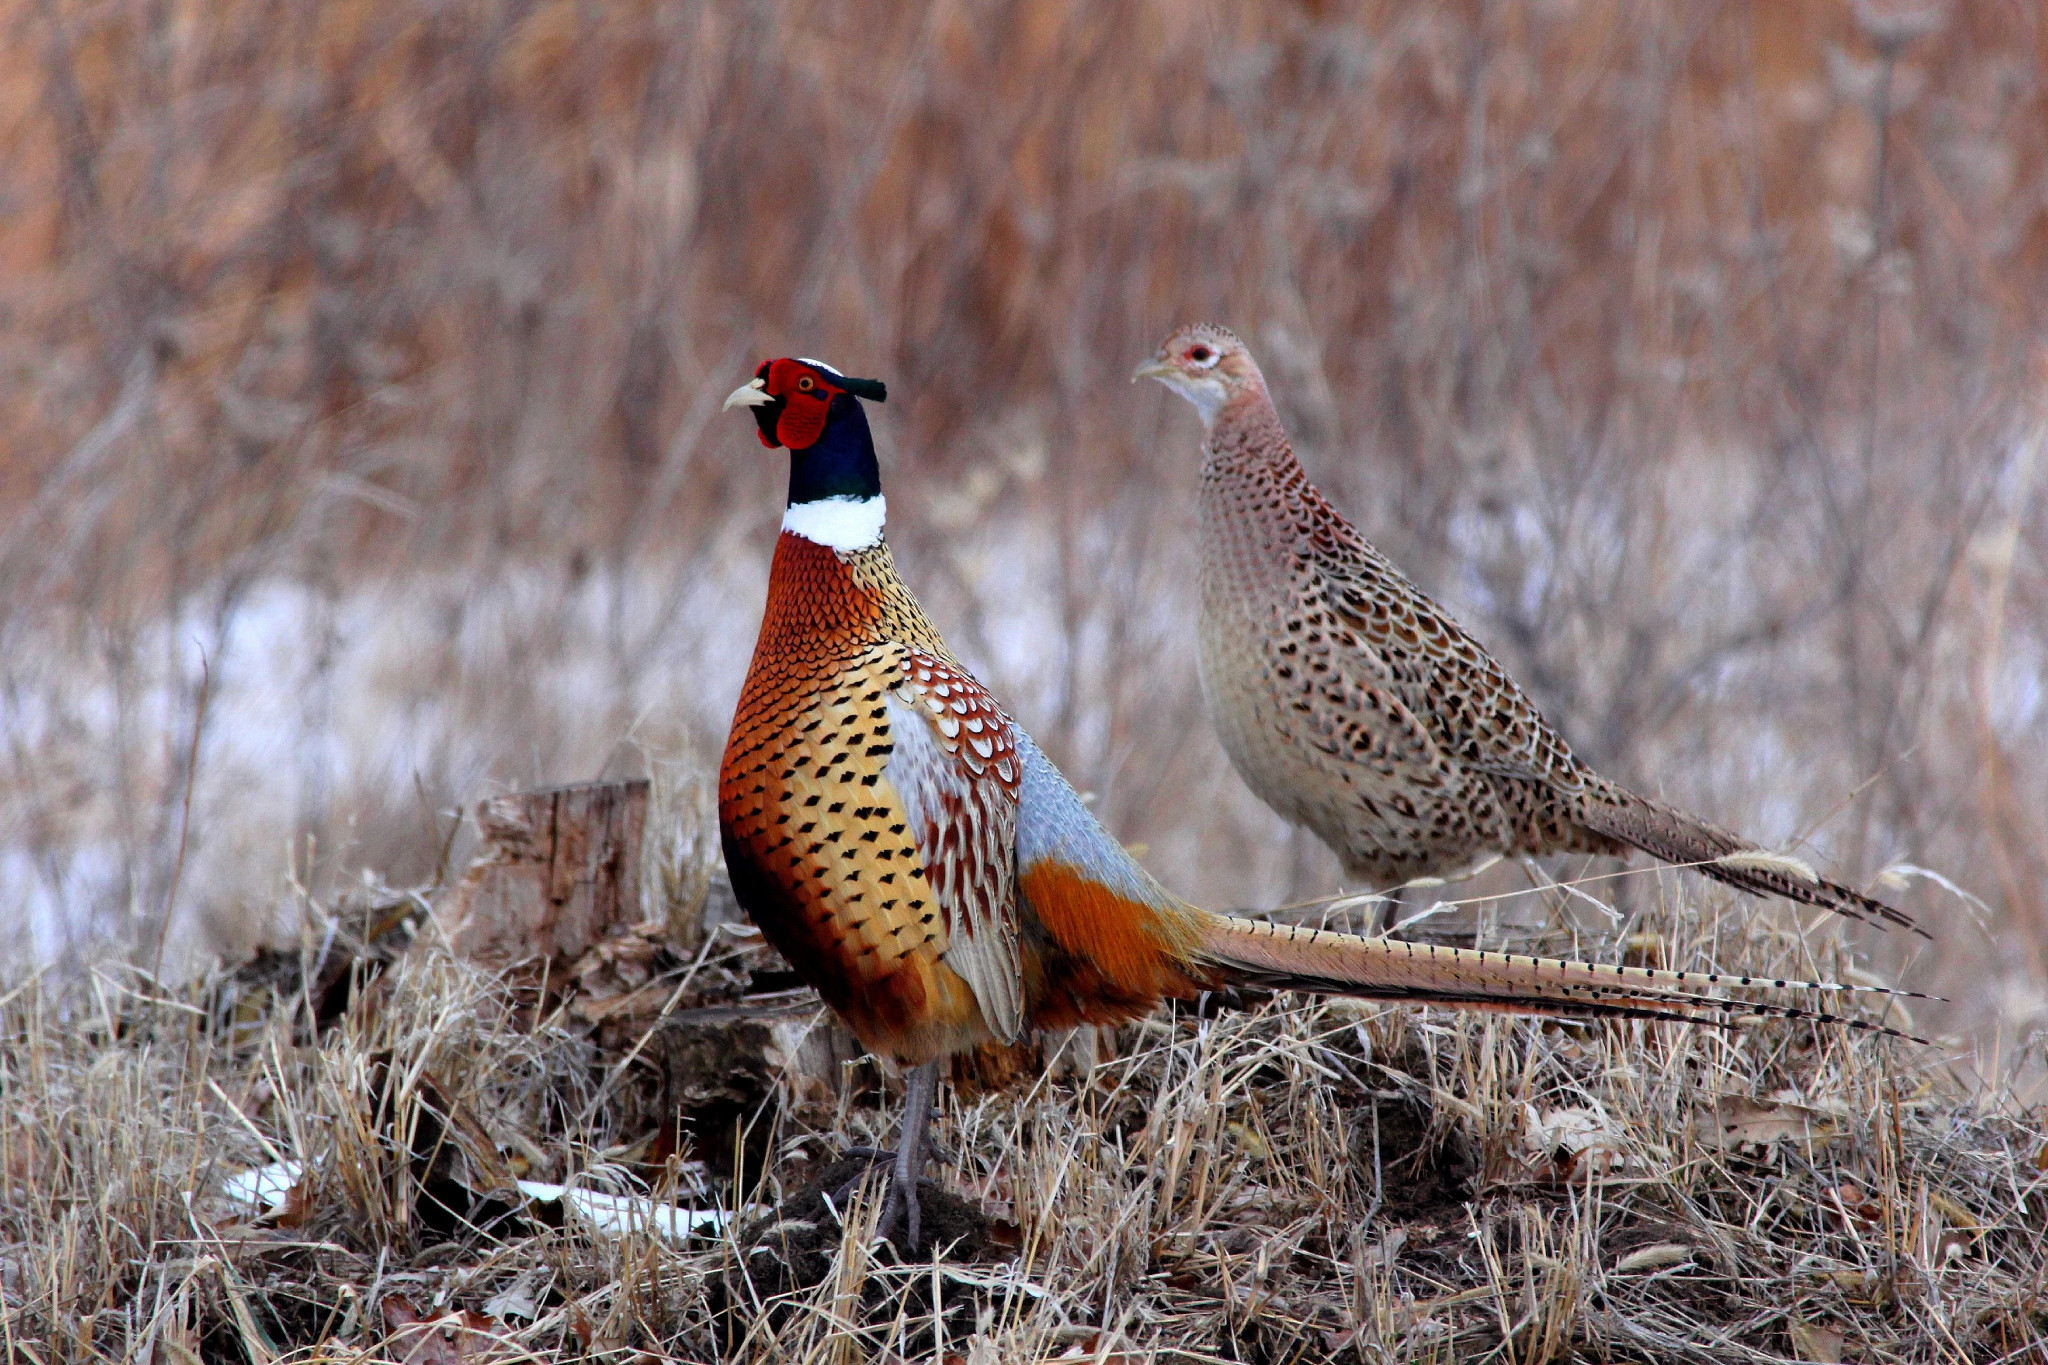 Pheasant Stocking Provides Additional Hunting Opportunities This